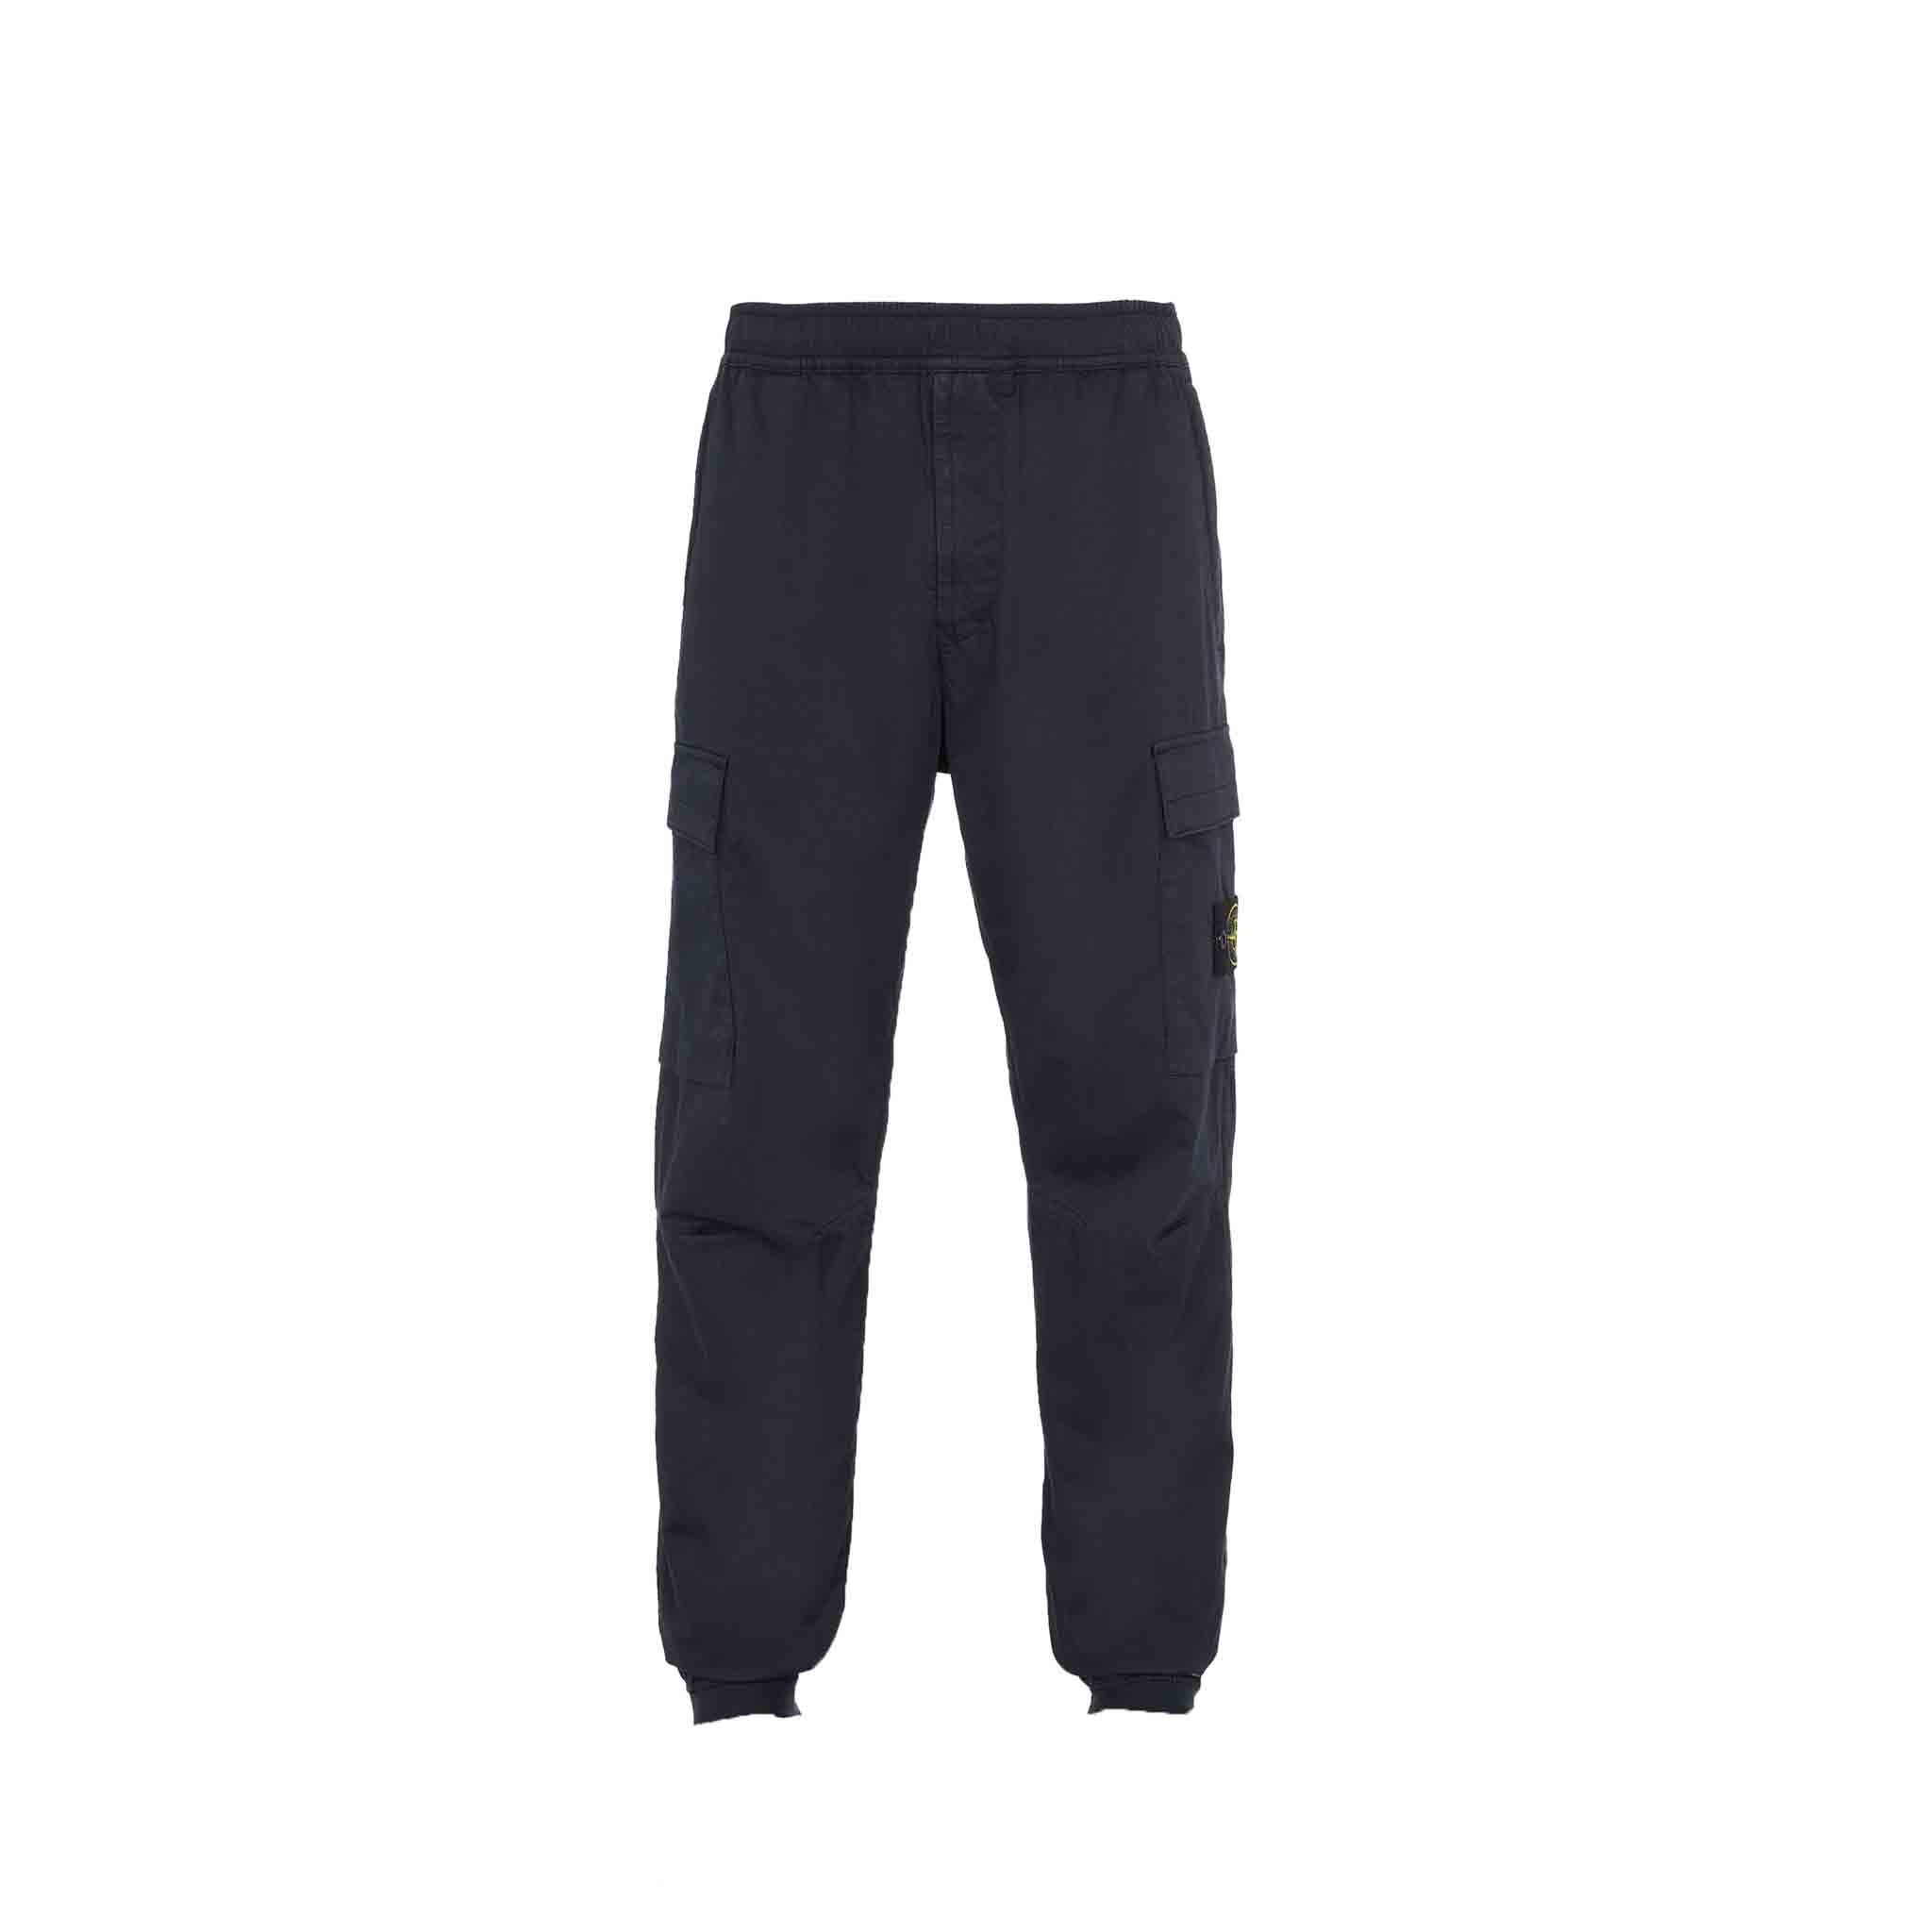 Stone Island Garment Dyed "Old" Treatment Cuffed Cargo Pants in Navy